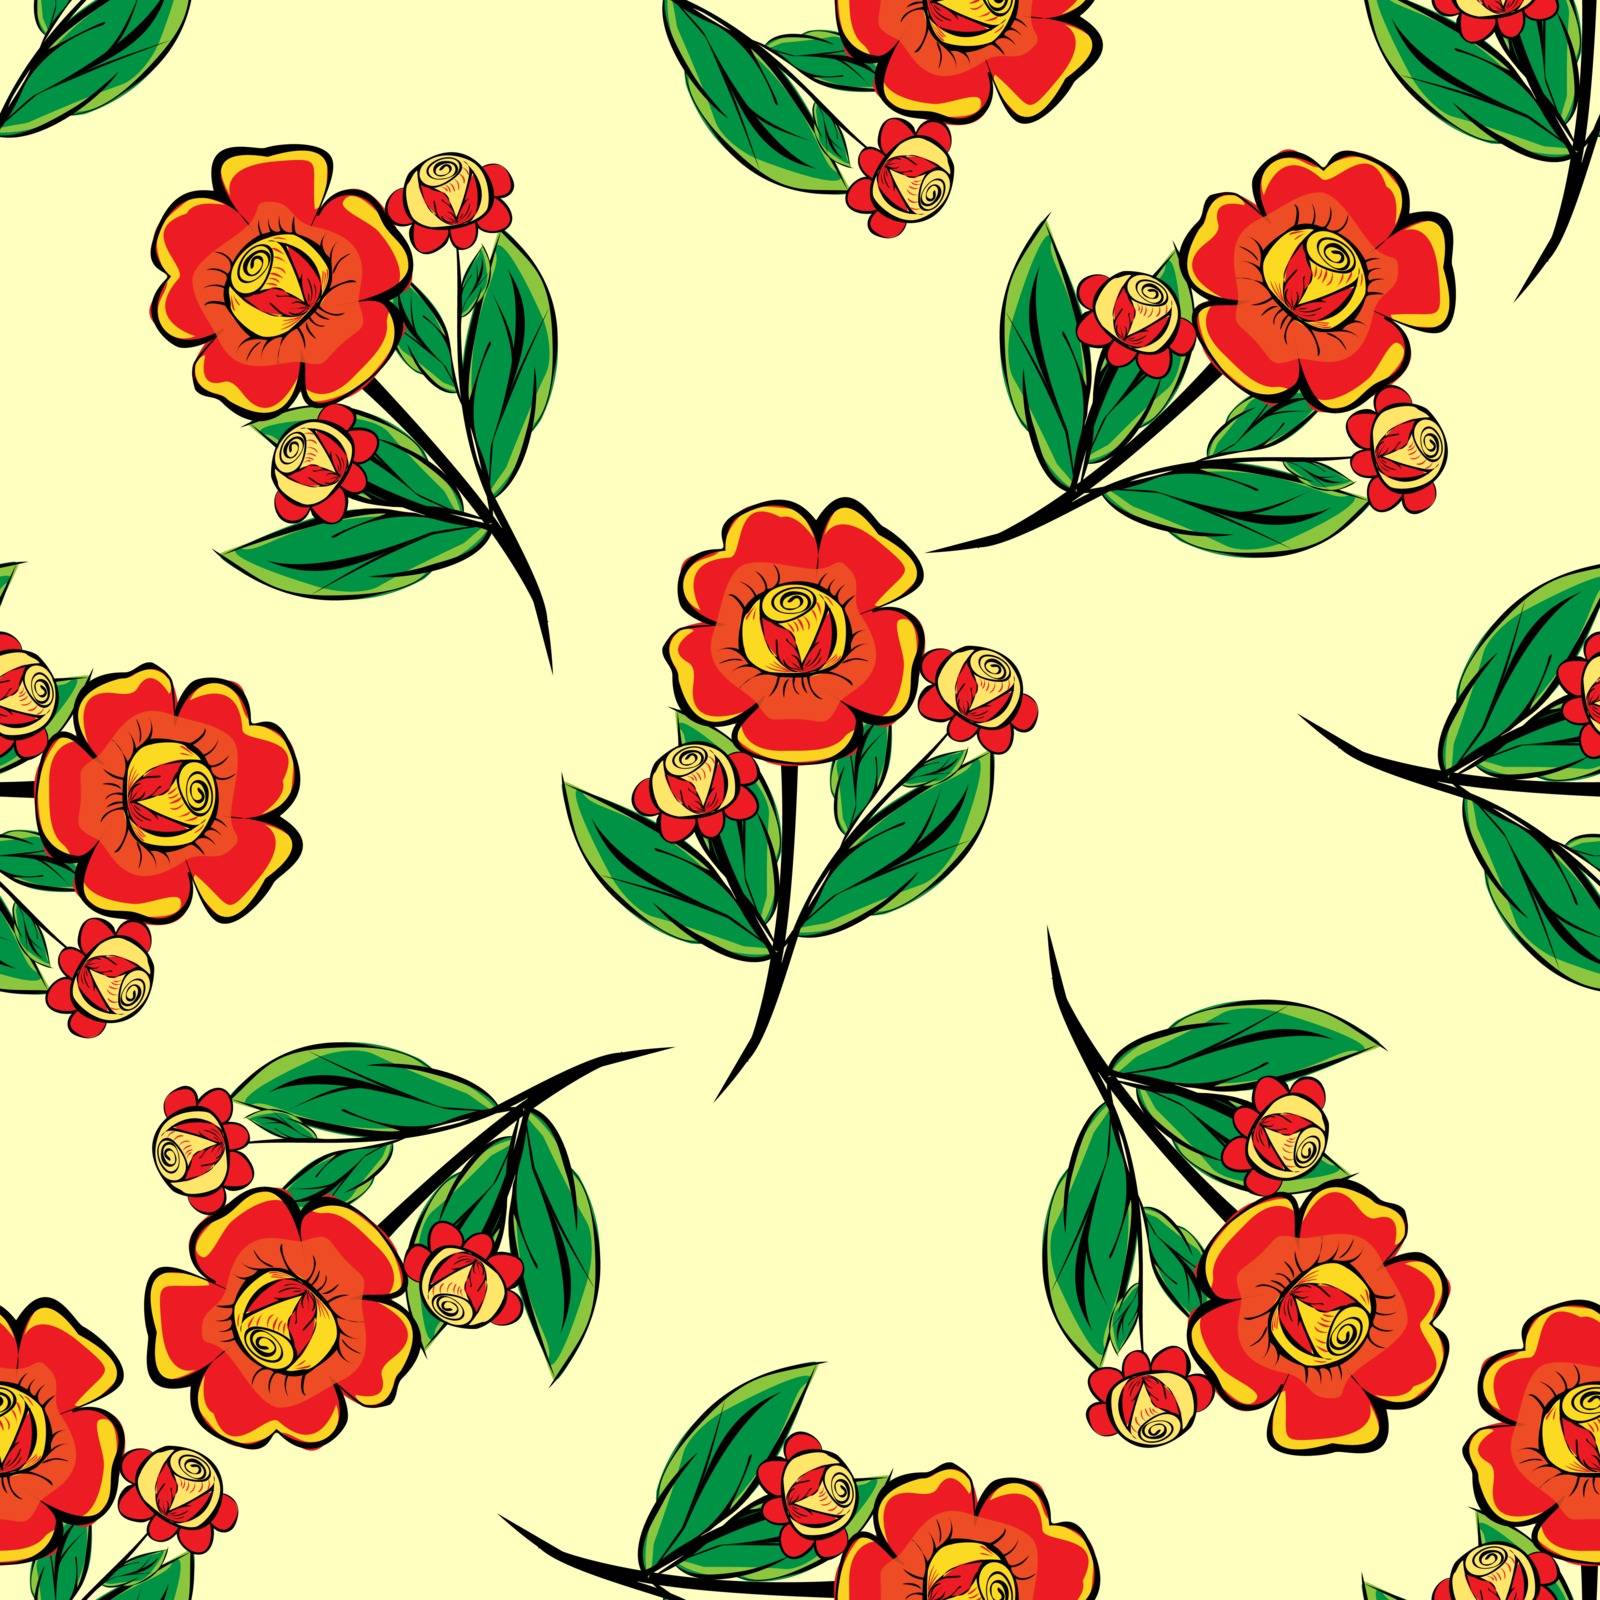 Red flowers on a green stalk seamless pattern vector natural background